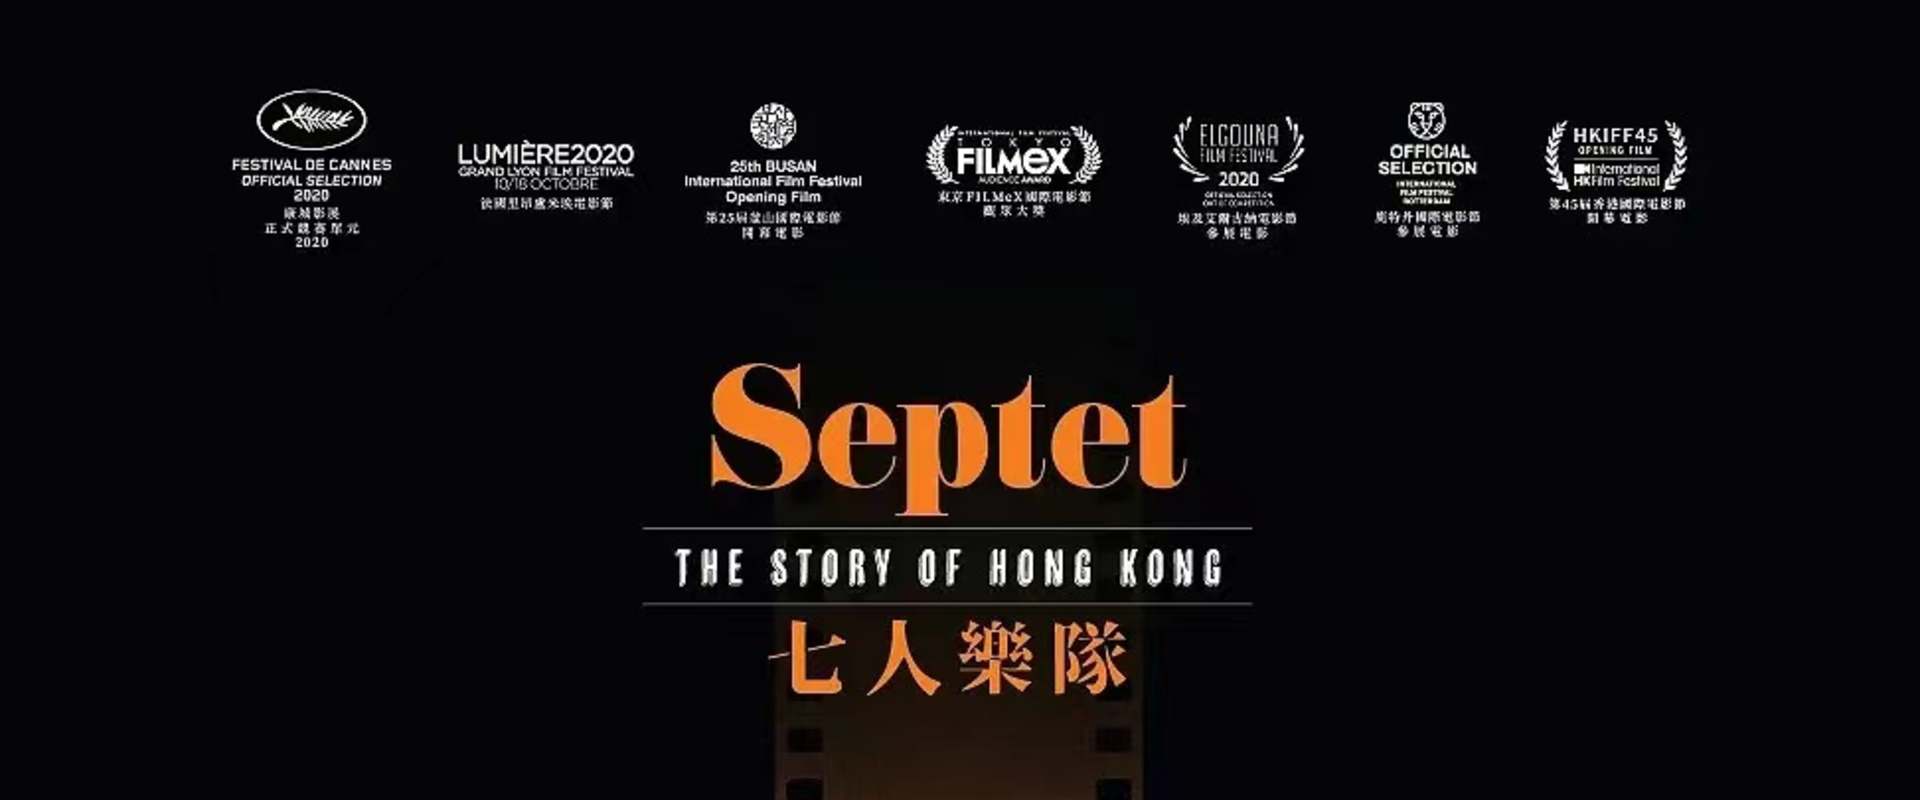 Septet: The Story of Hong Kong background 2